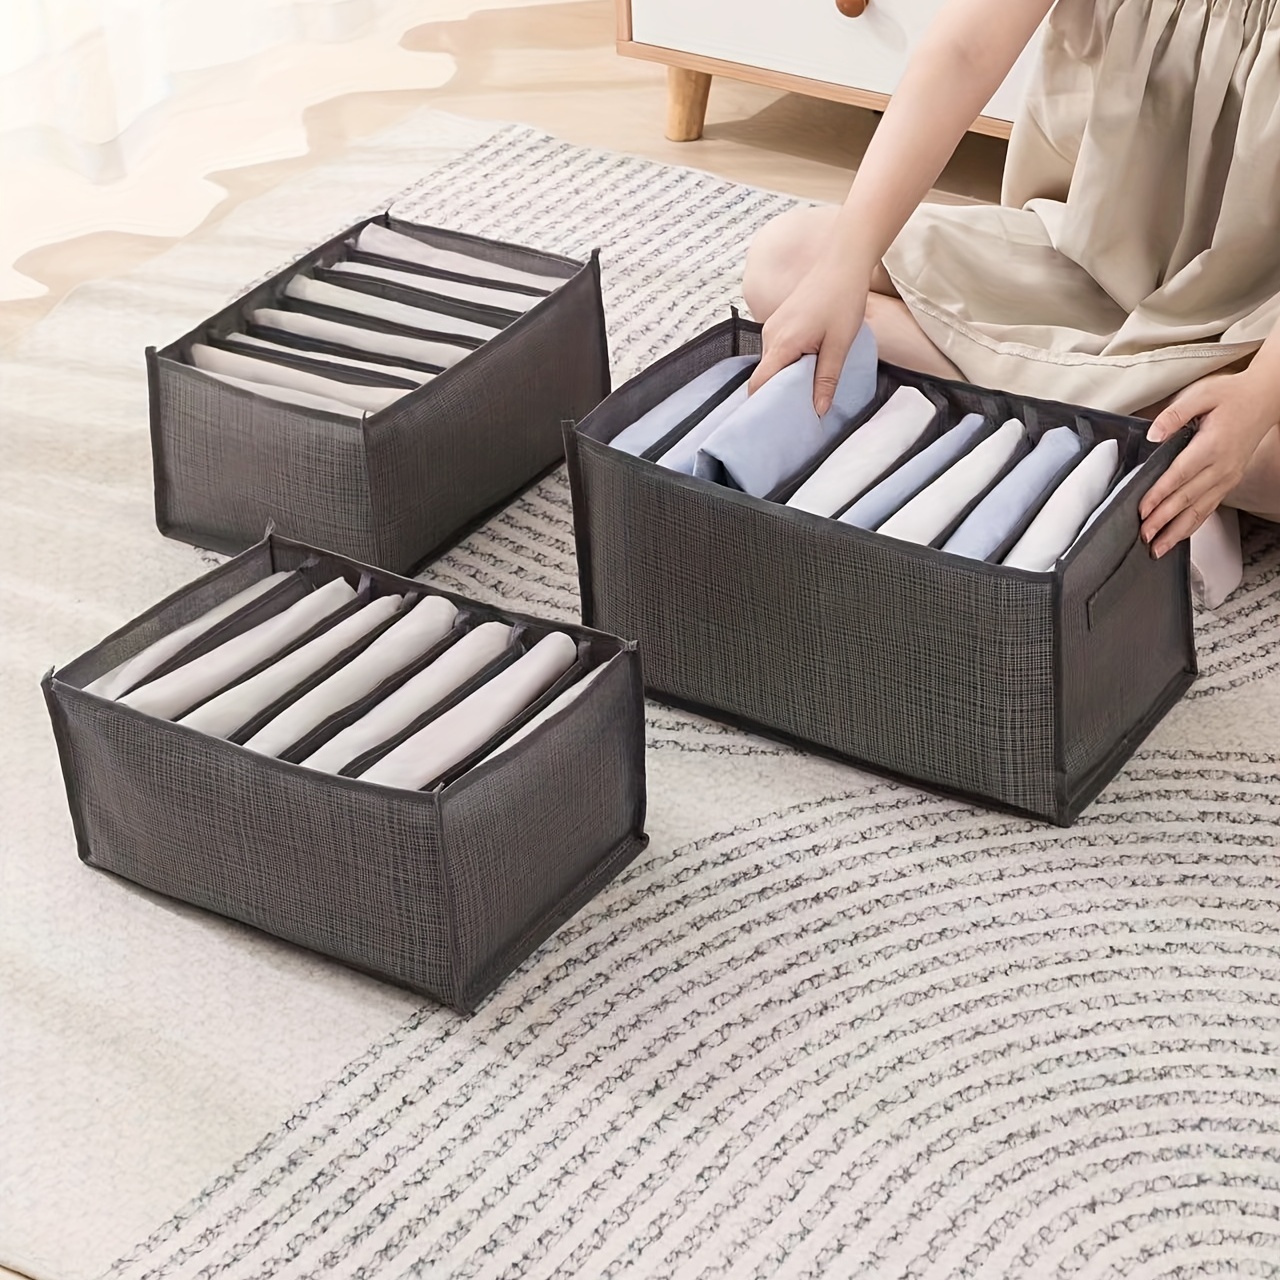 Food Storage Organizer Boxes Space Saving Organizers with Dividers